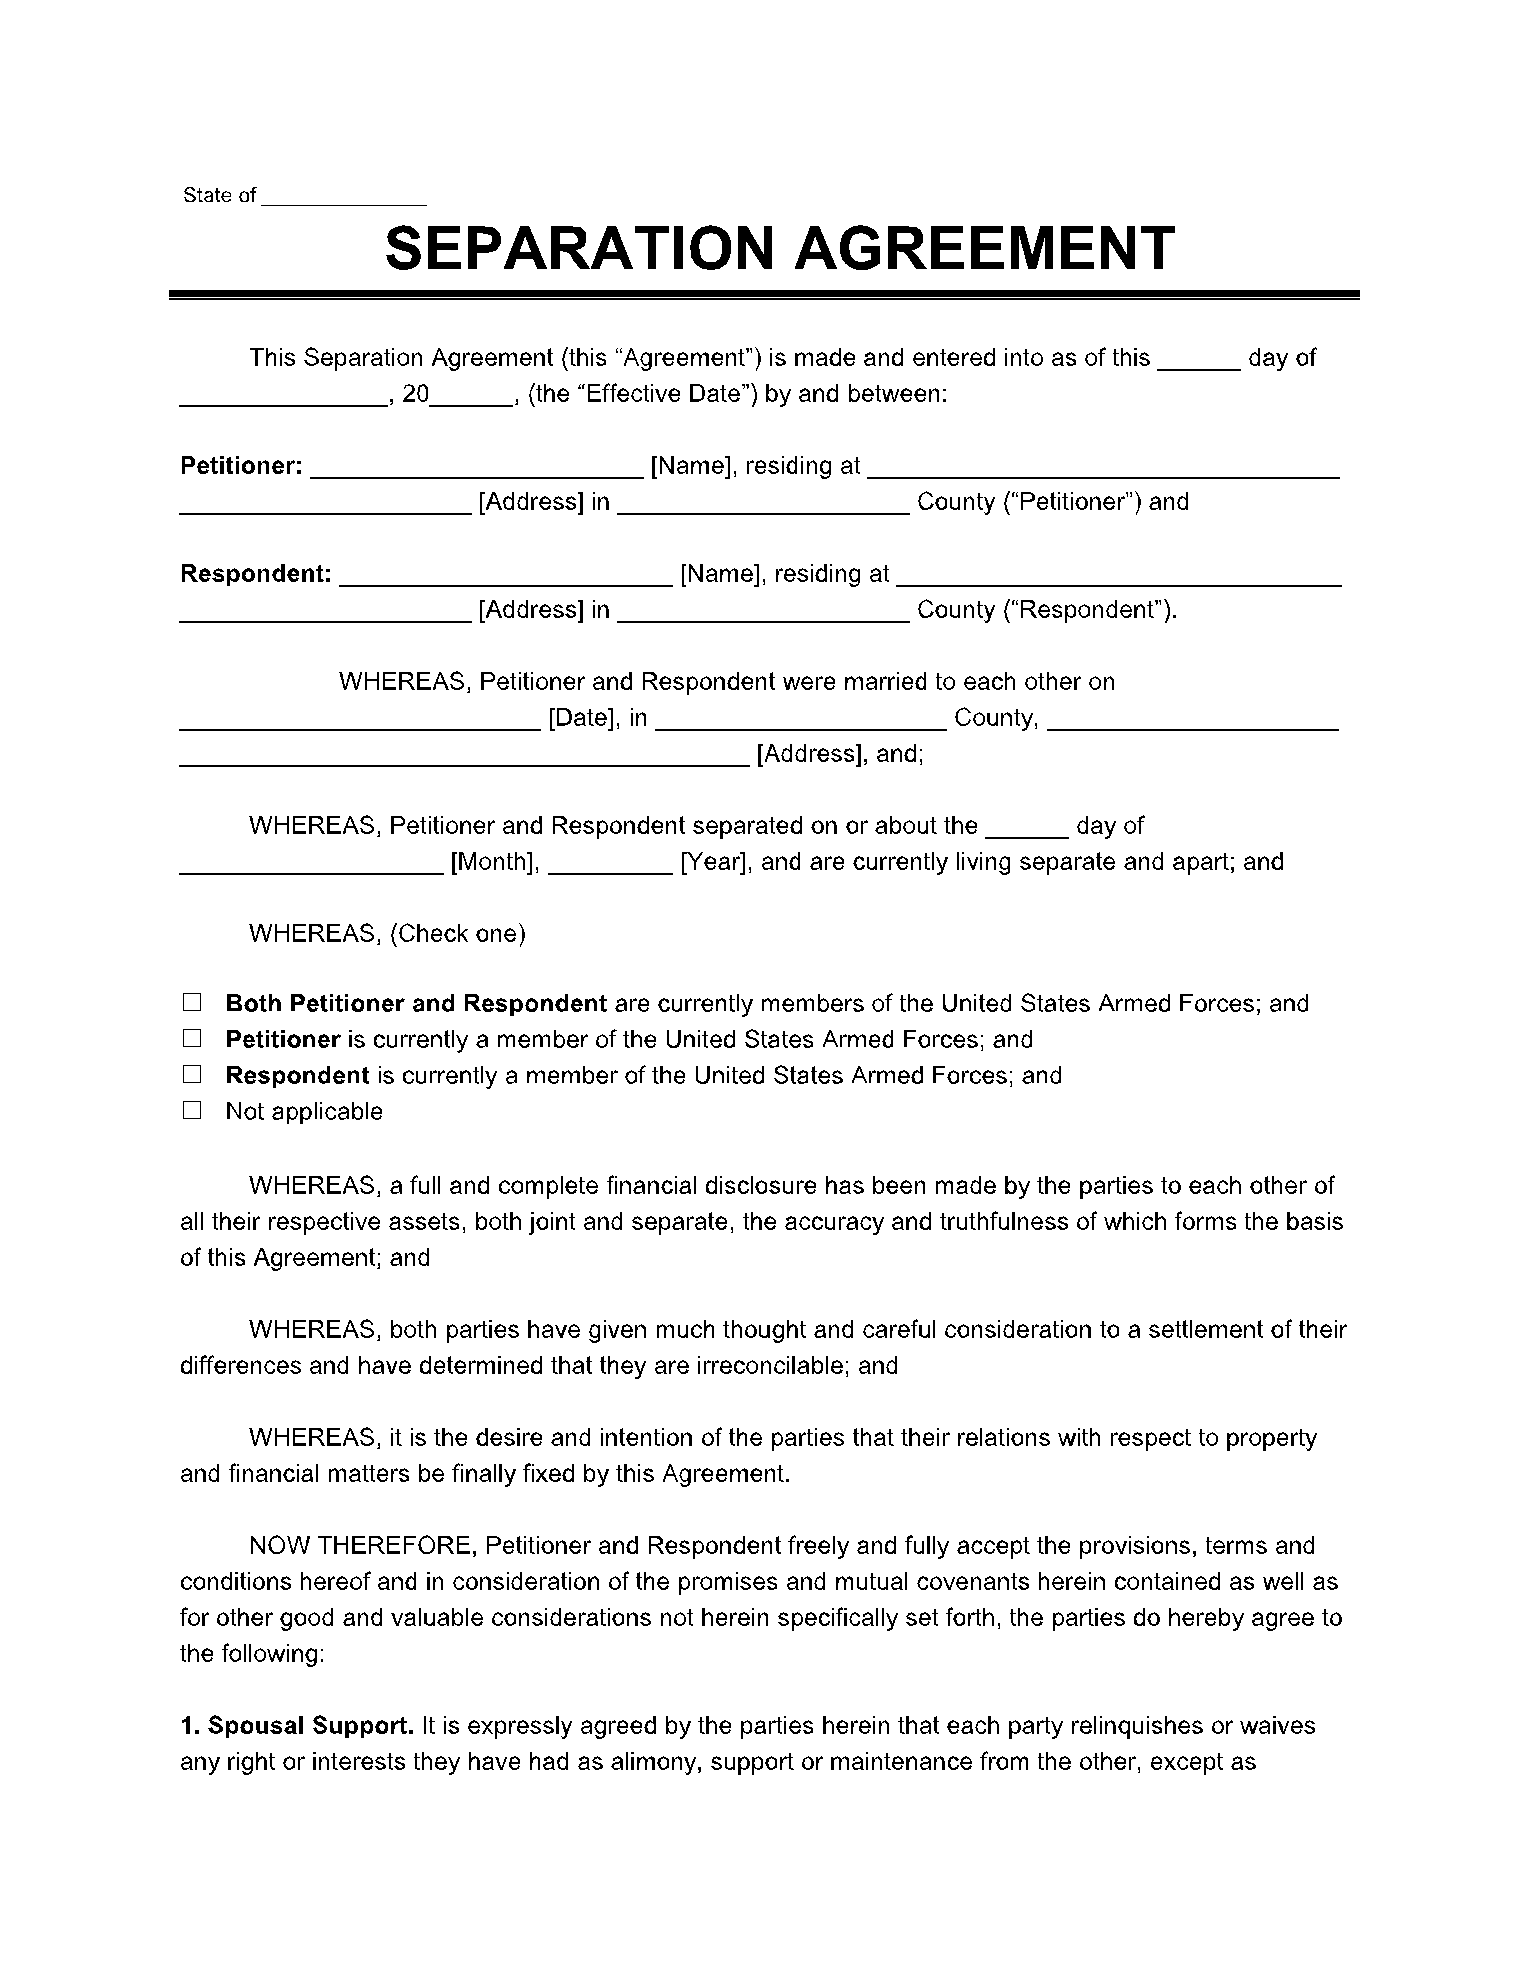 Separation Agreement Template 1